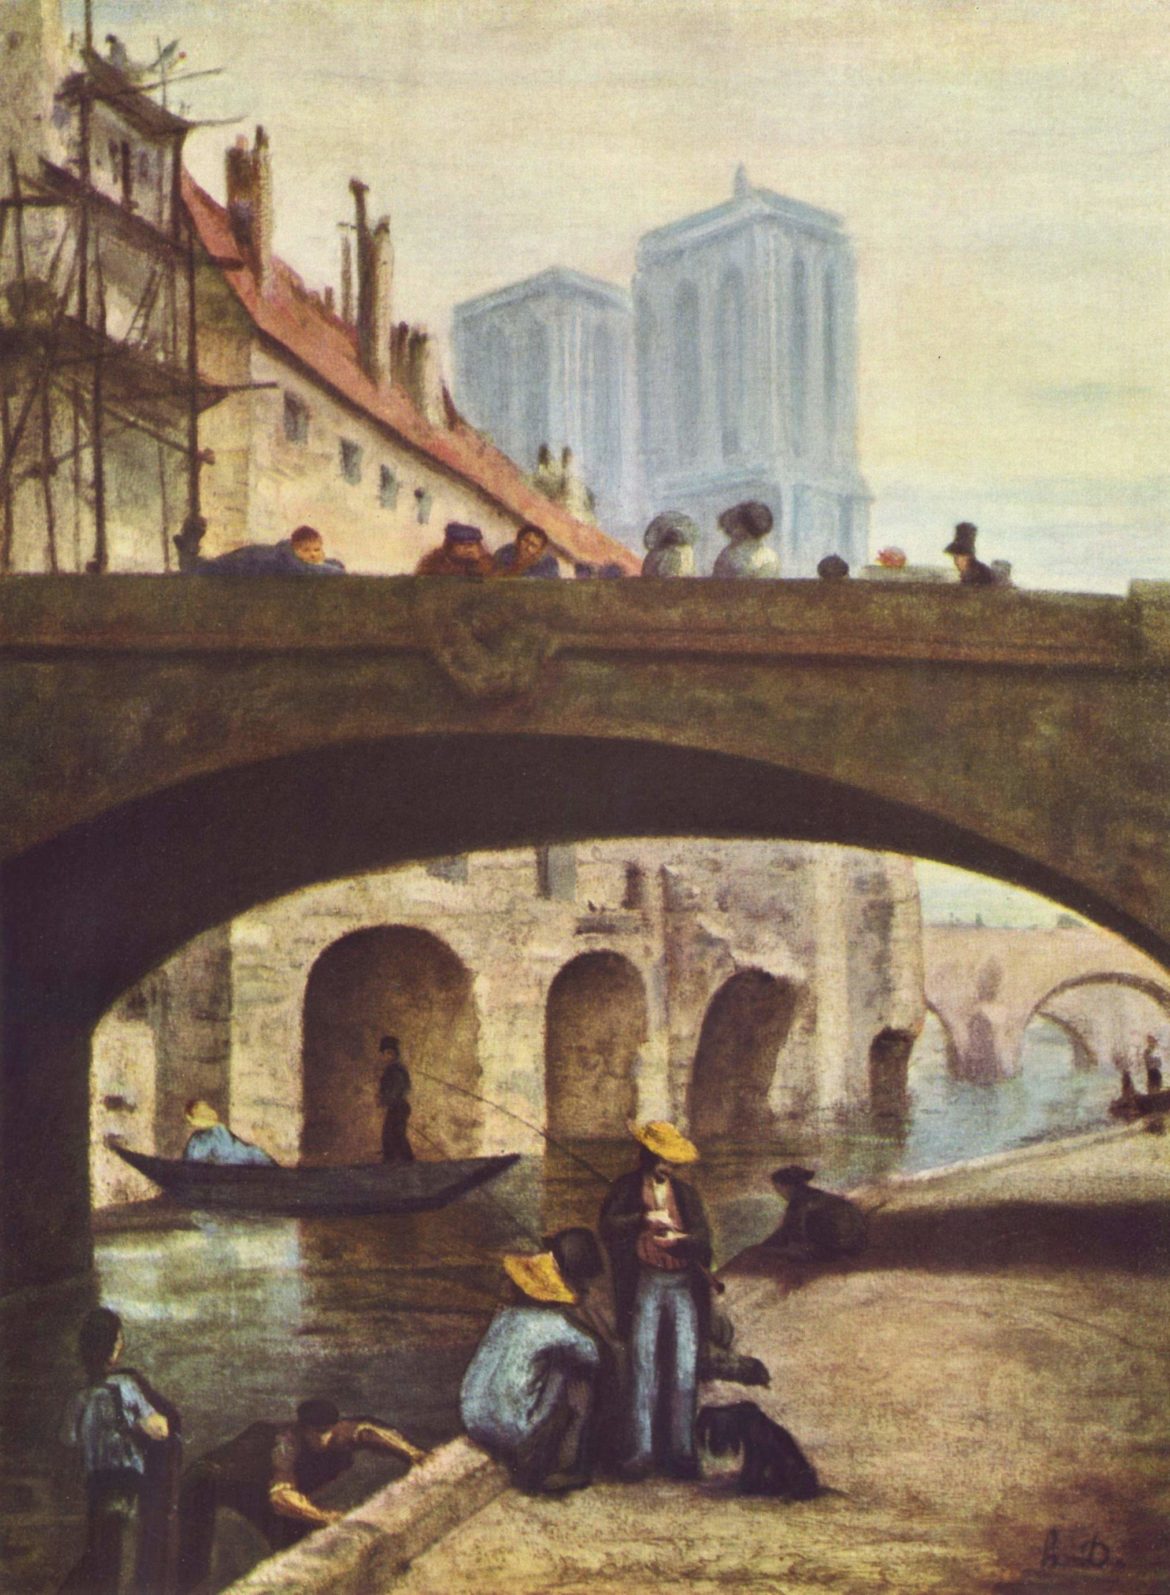 Honoré Daumier's 1834 painting of the Notre Dame cathedral.